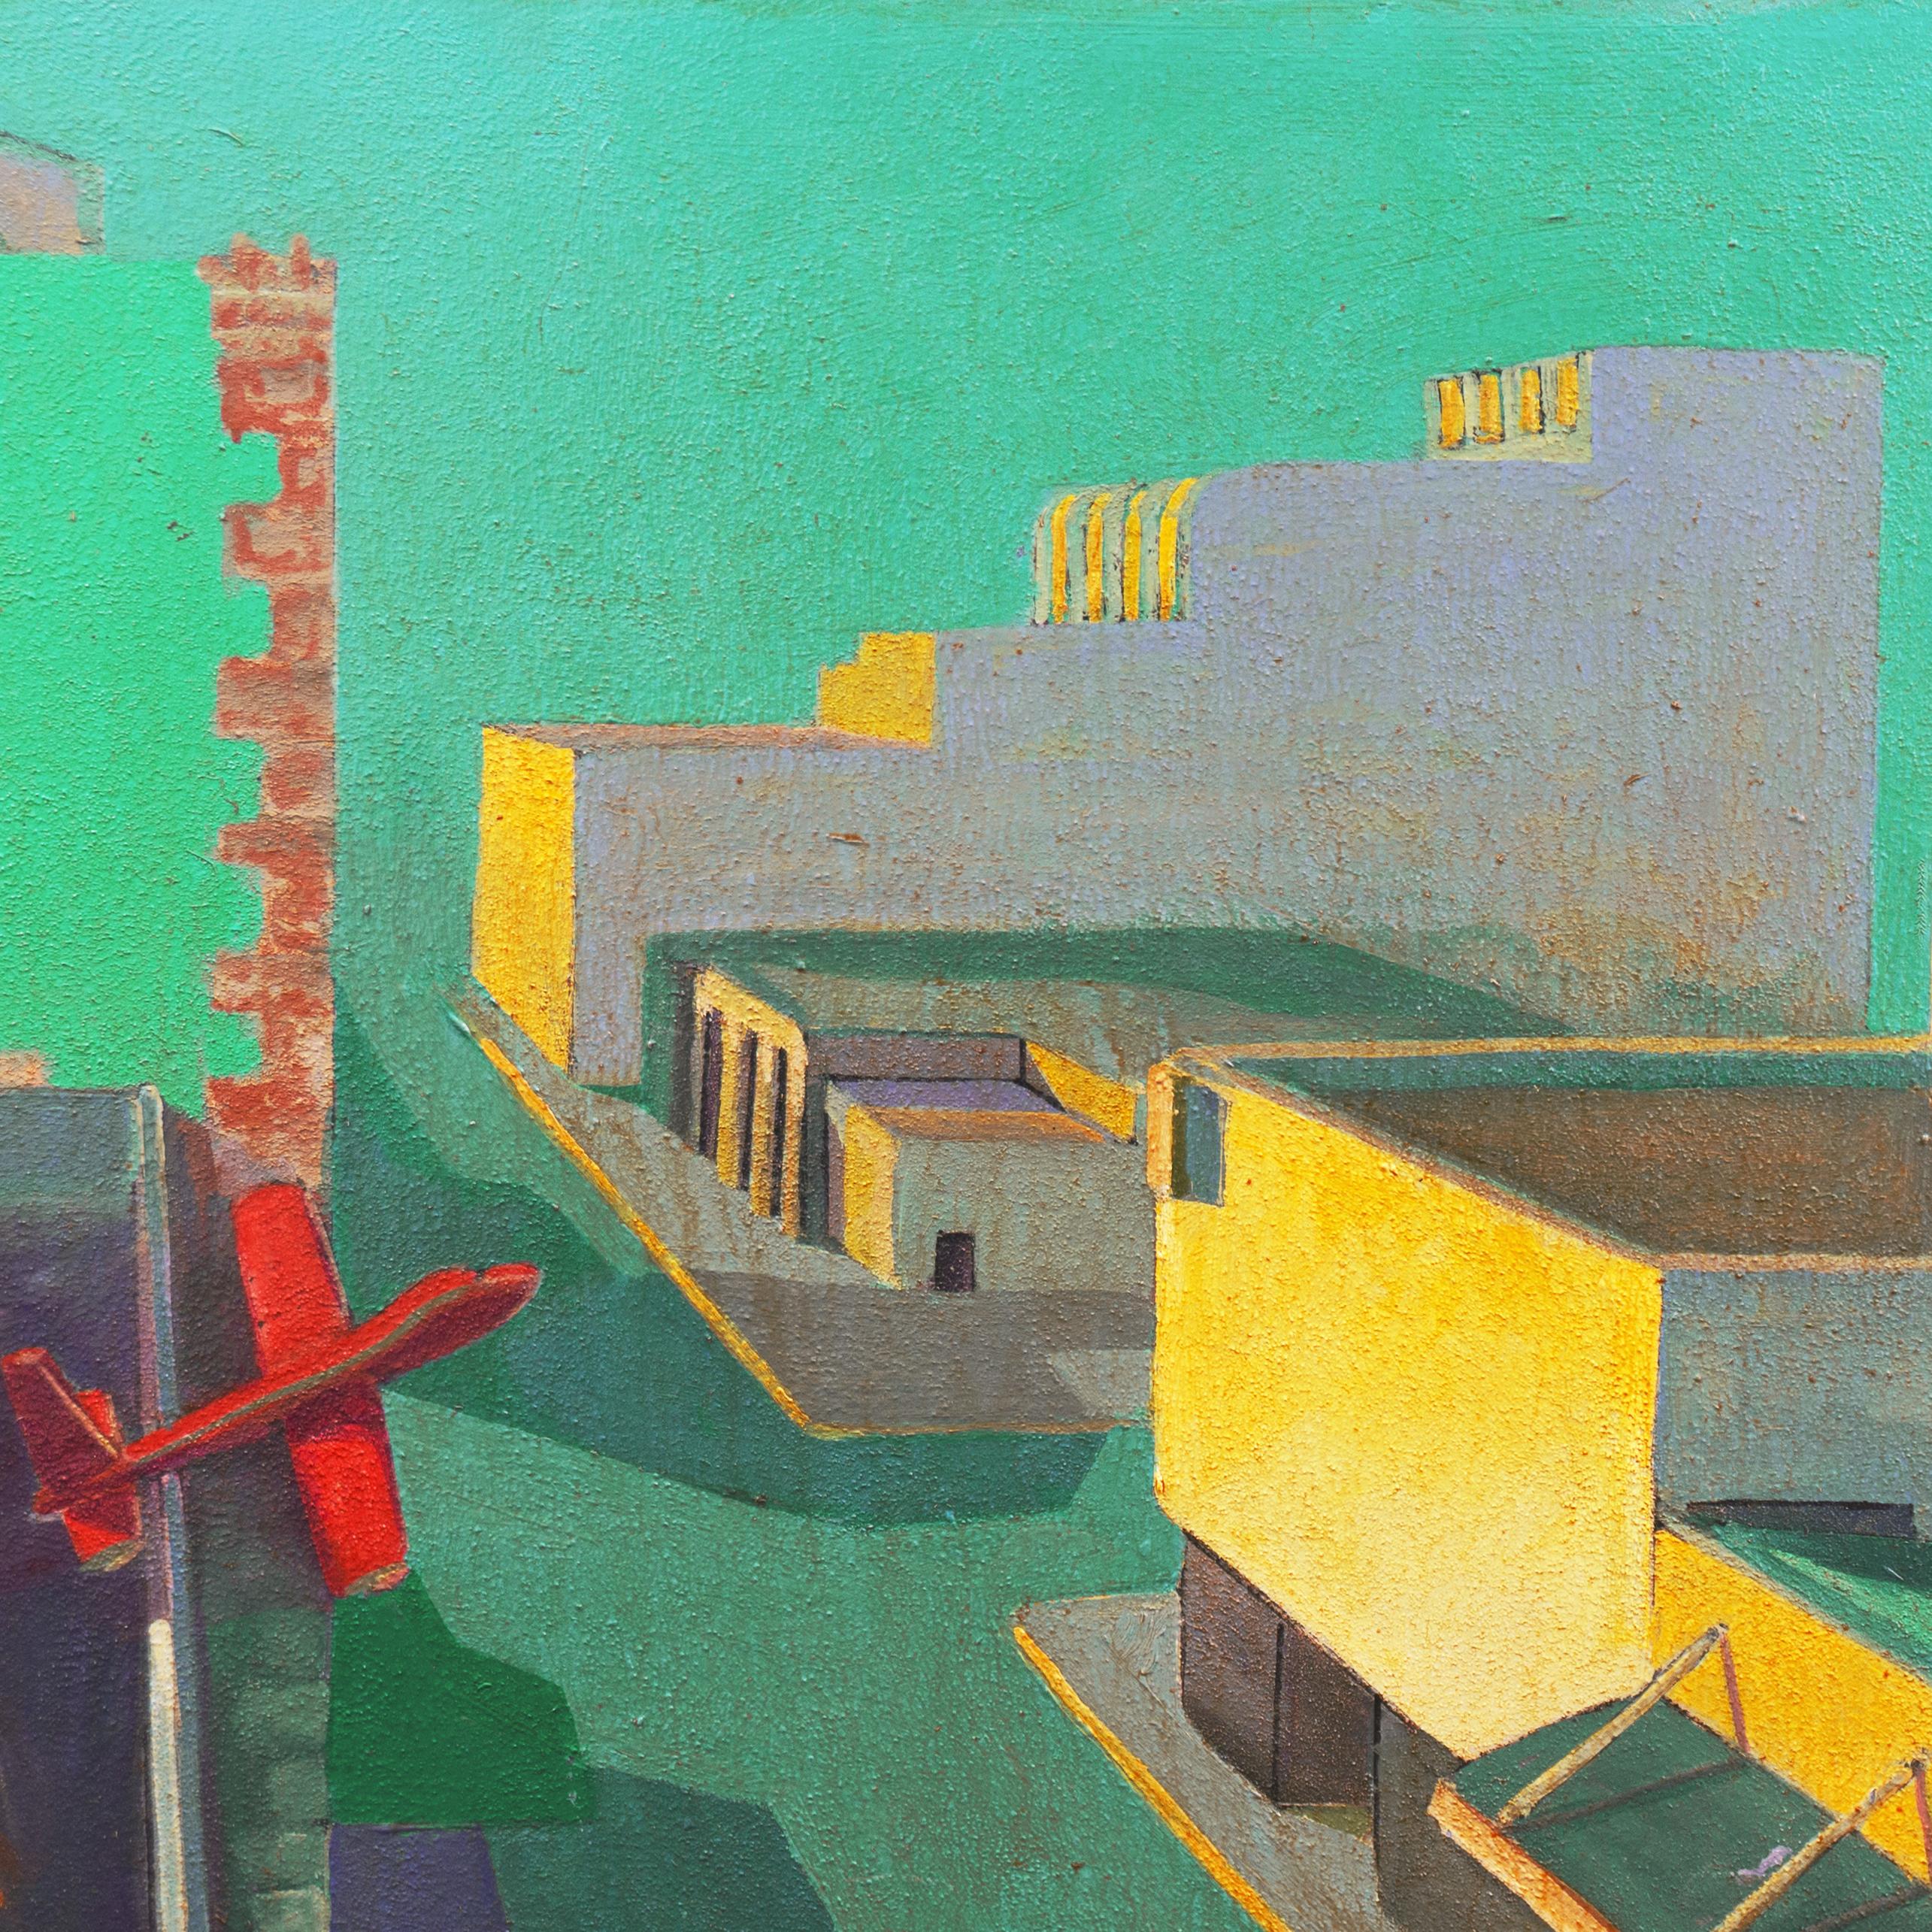 Signed lower right, 'Keith Longcor' (American, 1944-2015) and dated, '2002'; additionally titled verso, 'Airplanes from a Parking Garage- Modesto CA'.

A substantial Modernist landscape by this listed California artist who painted and exhibited in